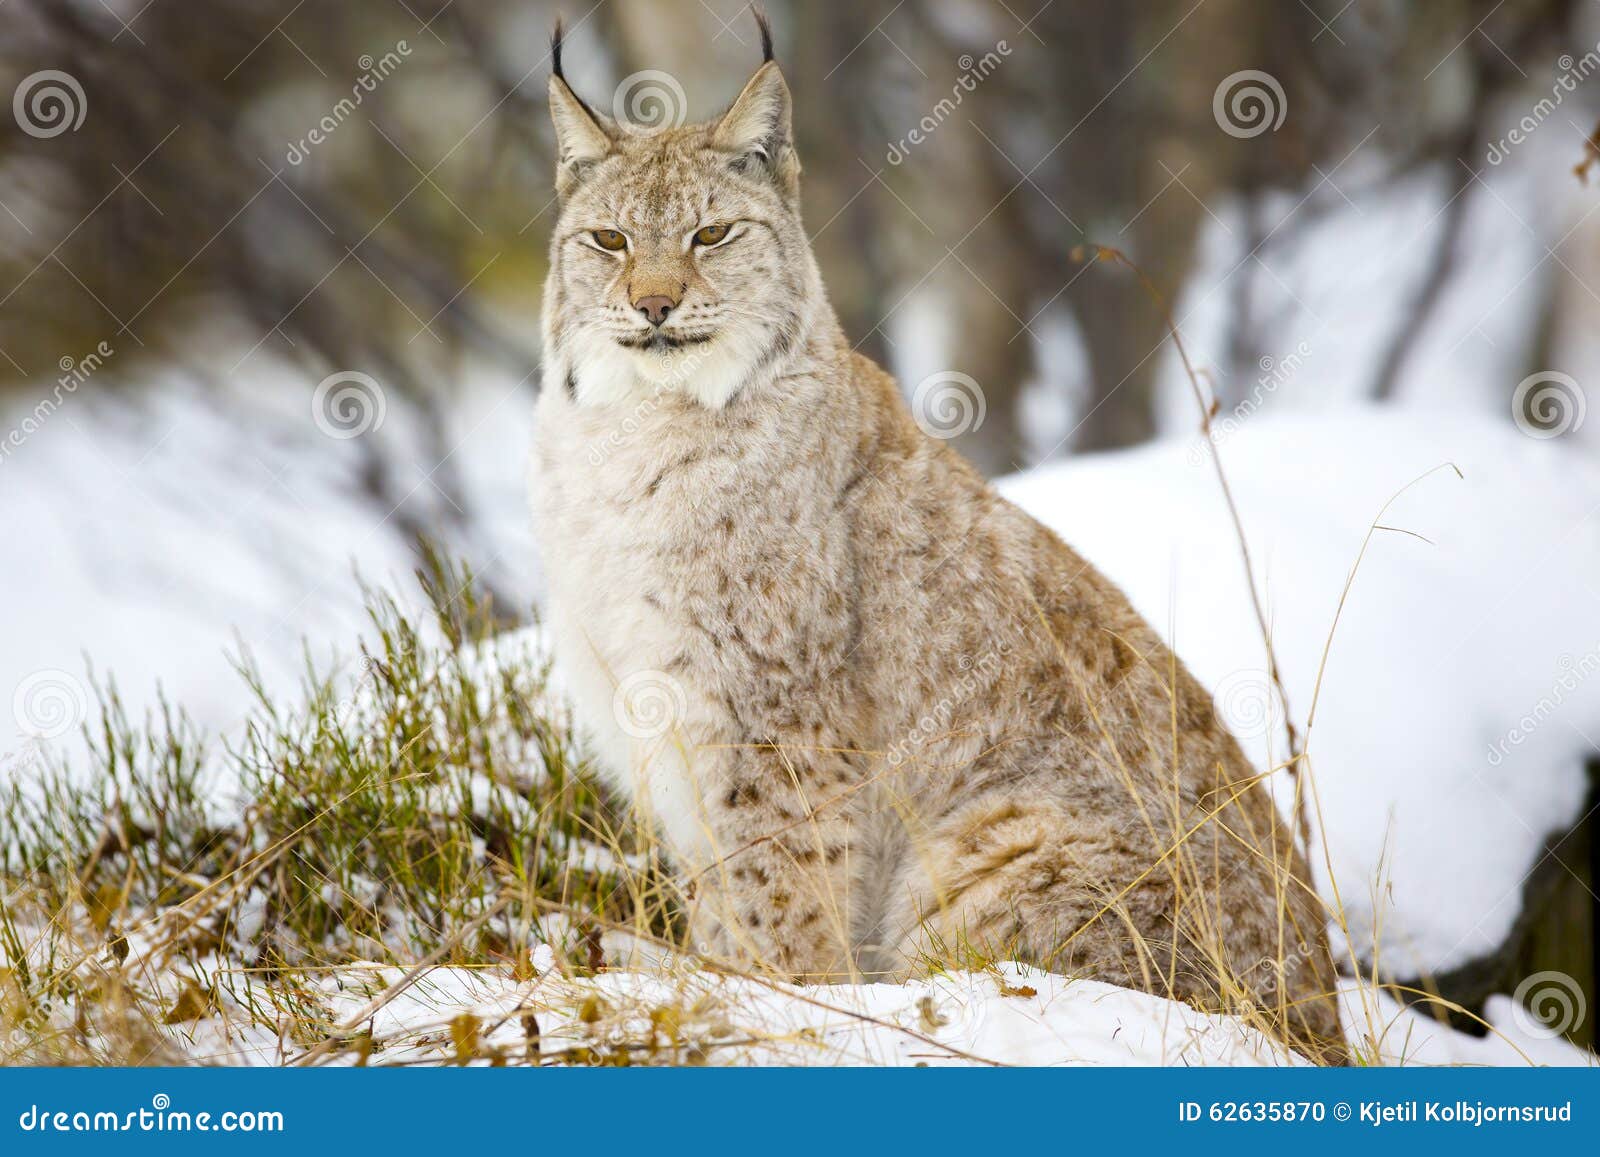 Beautiful Lynx Cat Sitting in the Winter Forest Stock Photo - Image of ...